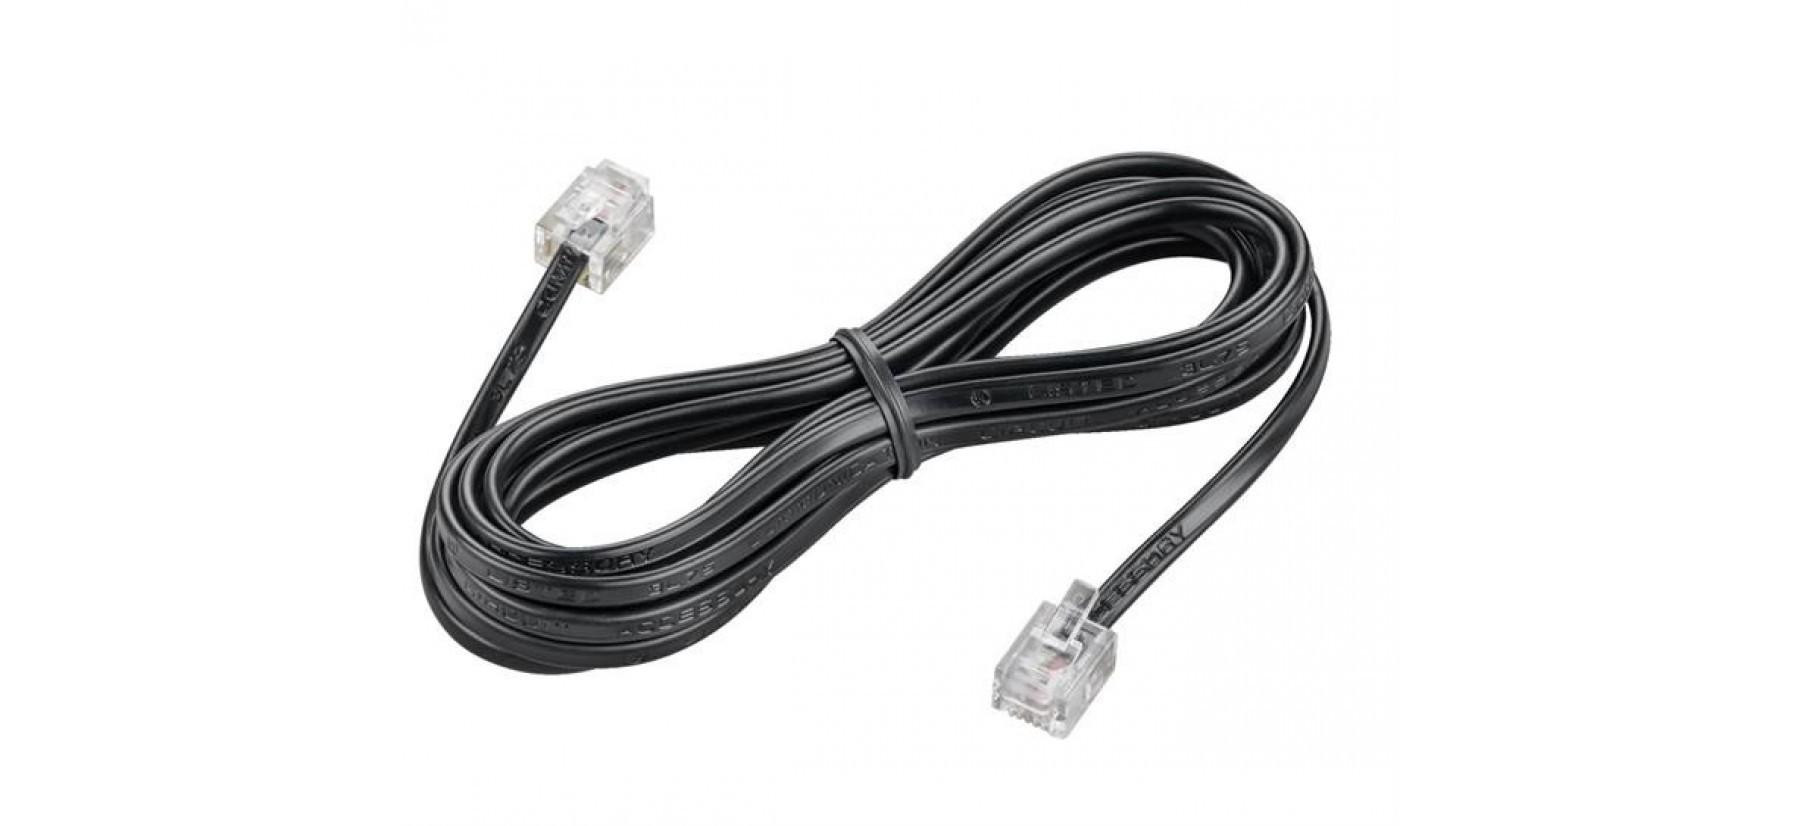 RJ12 Cable